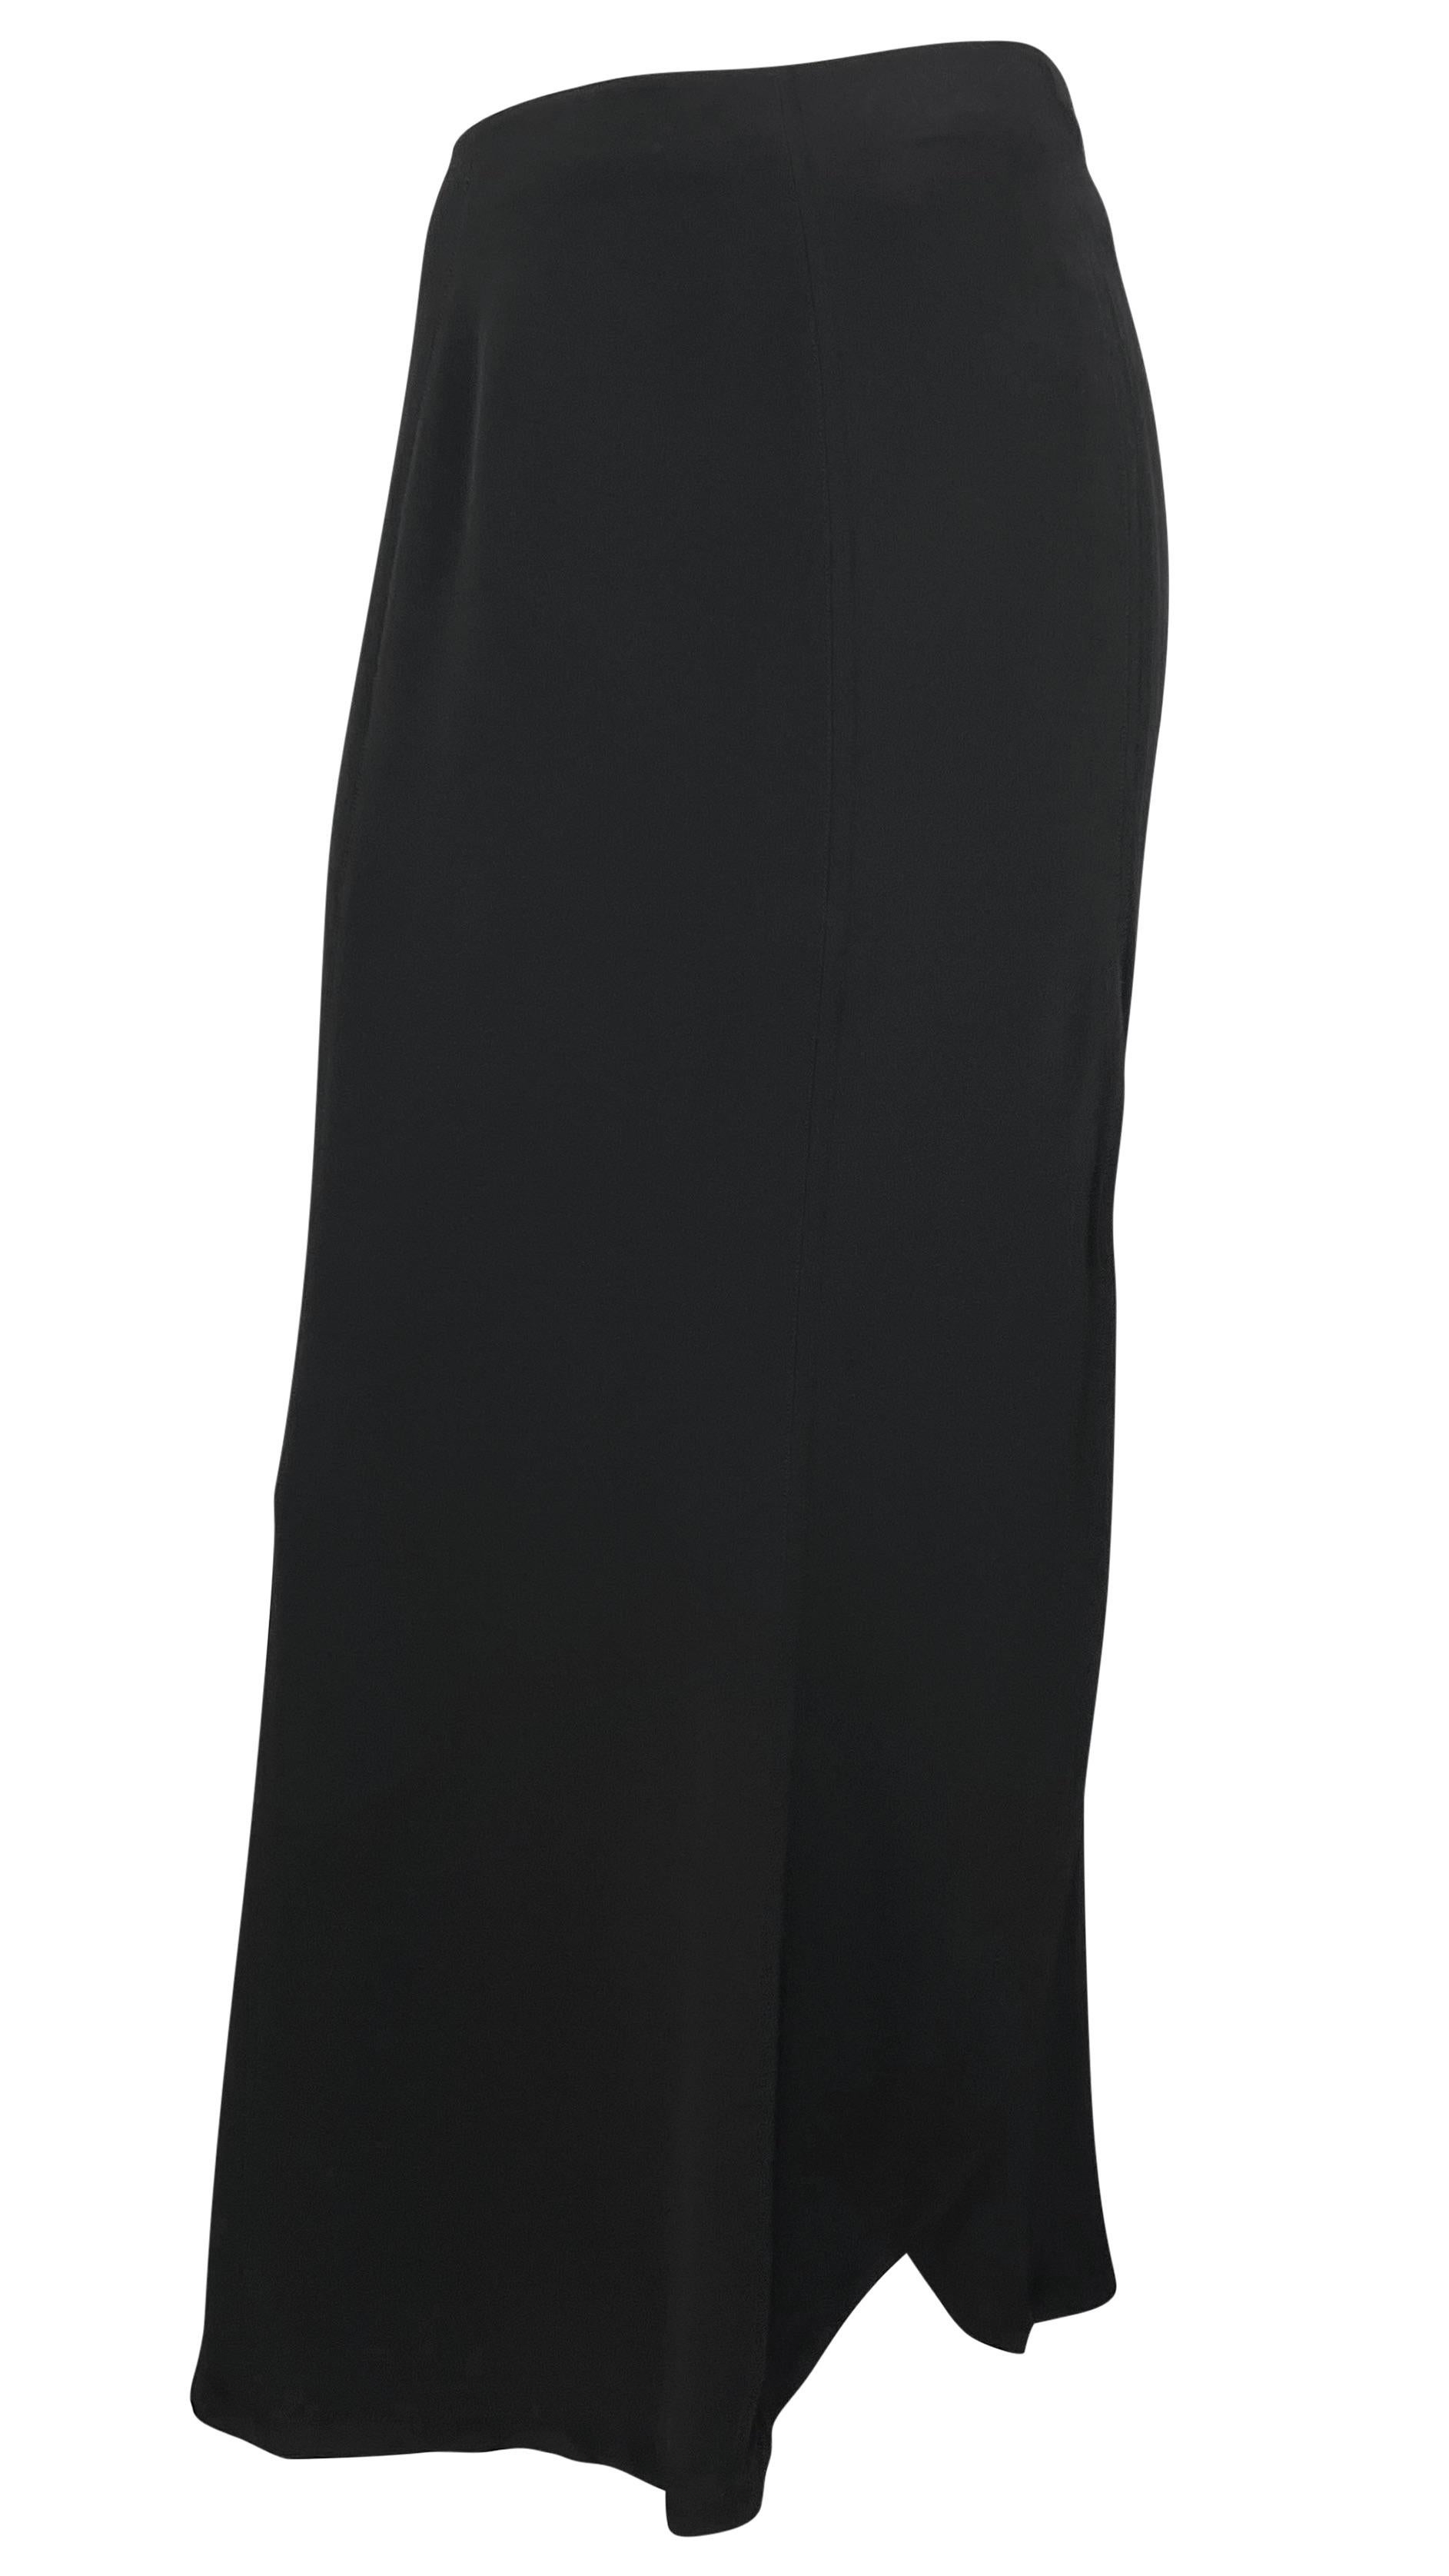 From the 1990s, this black Thierry Mugler maxi faux wrap style skirt is an elevated closet essential. Effortlessly chic with a slightly high waist, this skirt's hem falls just above the ankles. 

Approximate measurements:
Size - 40FR
Waistband to